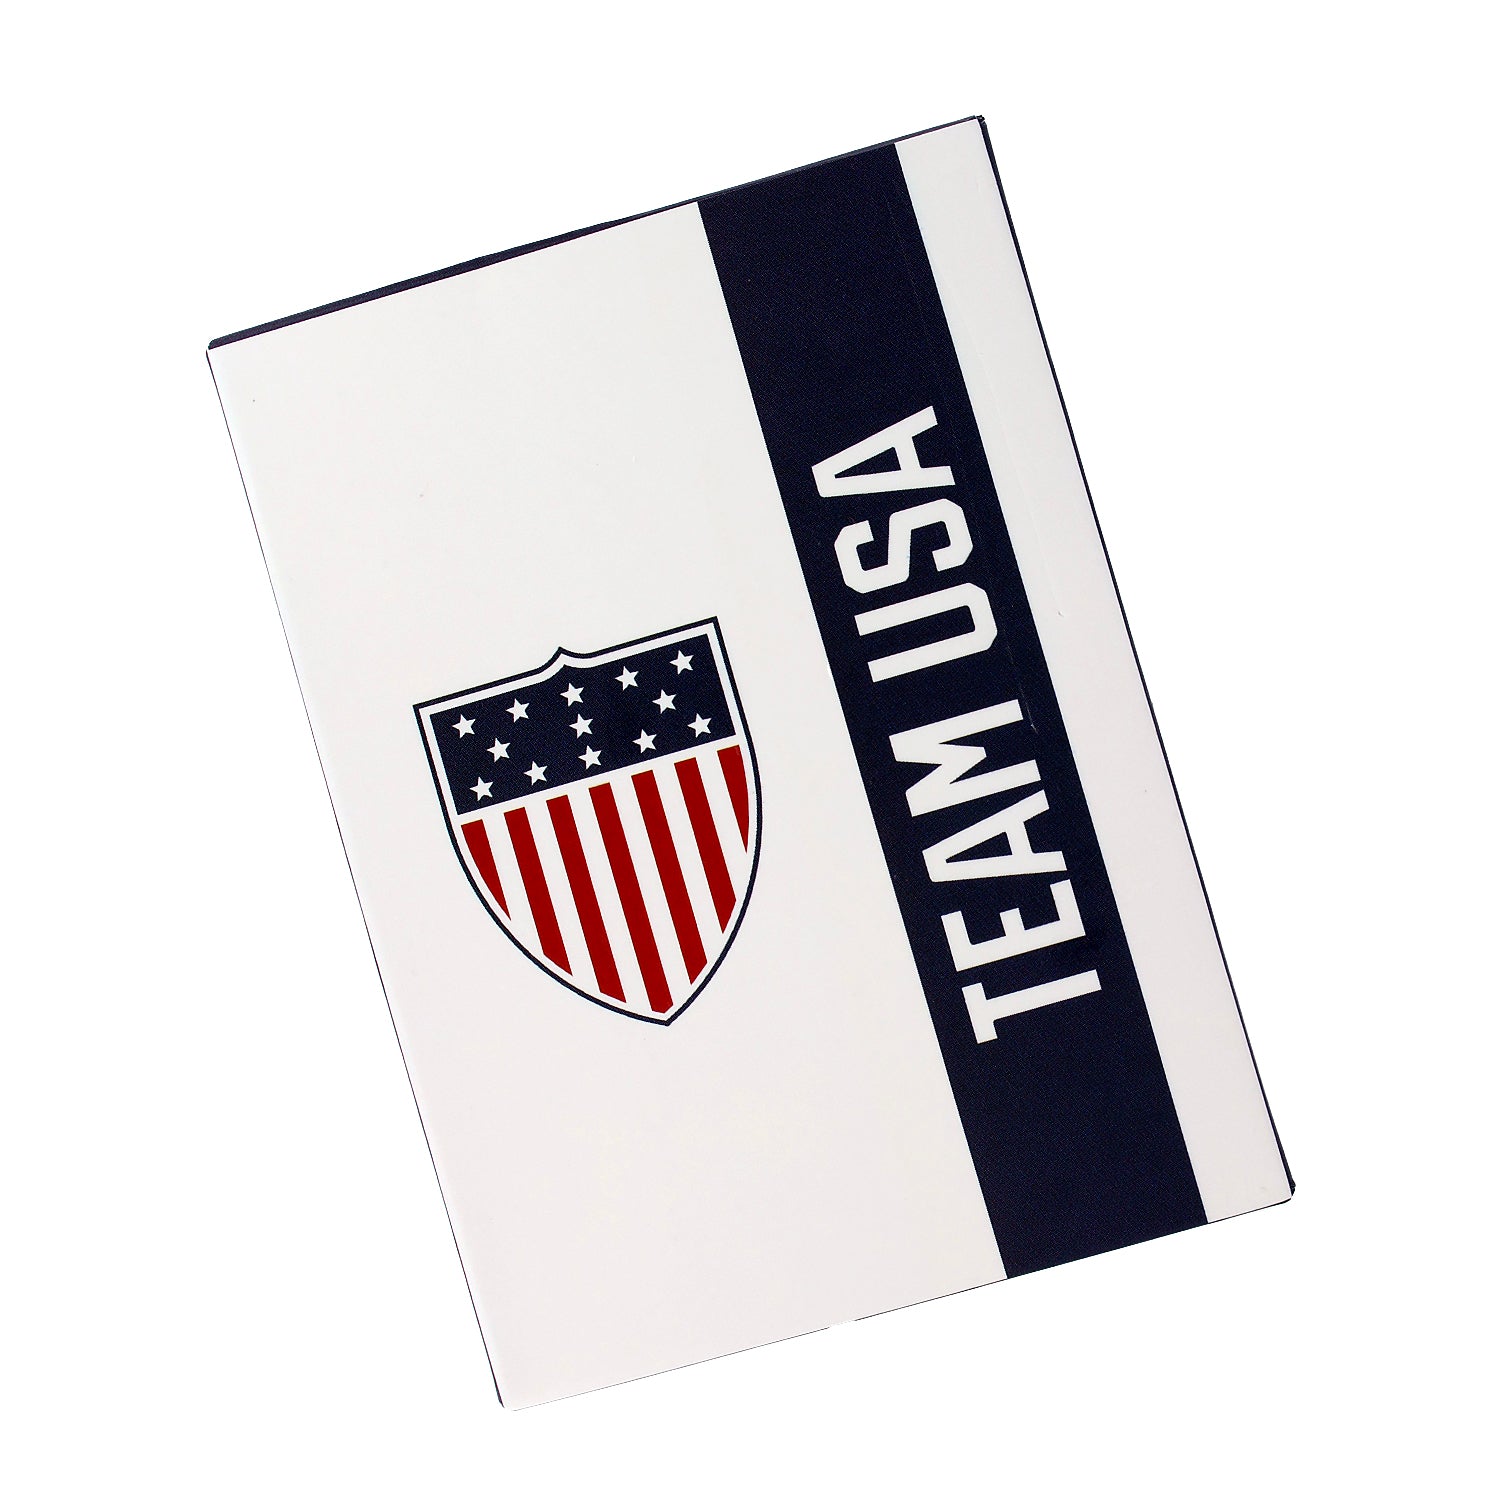 Team USA Olympic Playing Cards